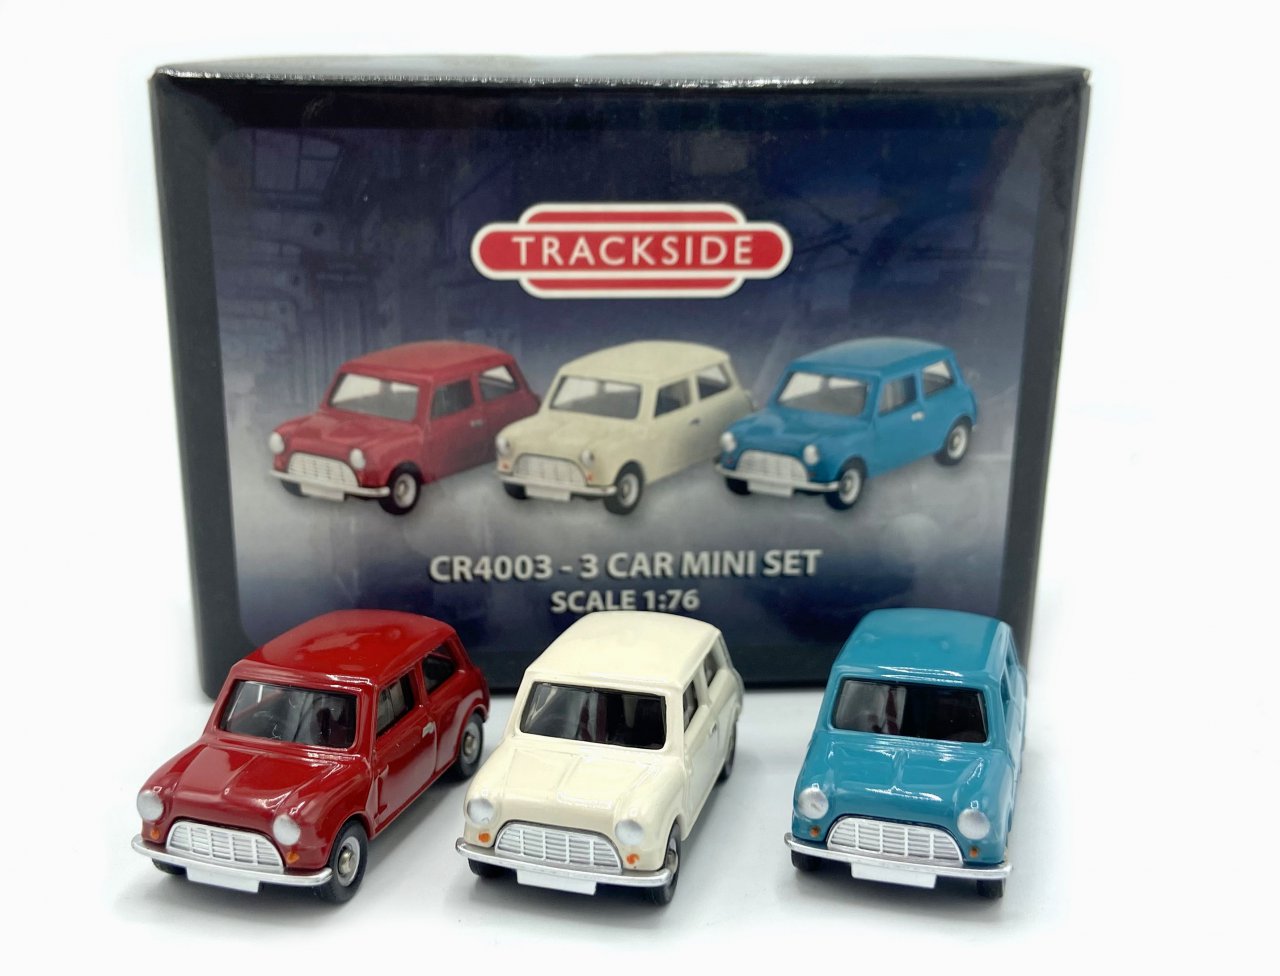 model cars, British parts company selling its model car collection, ClassicCars.com Journal